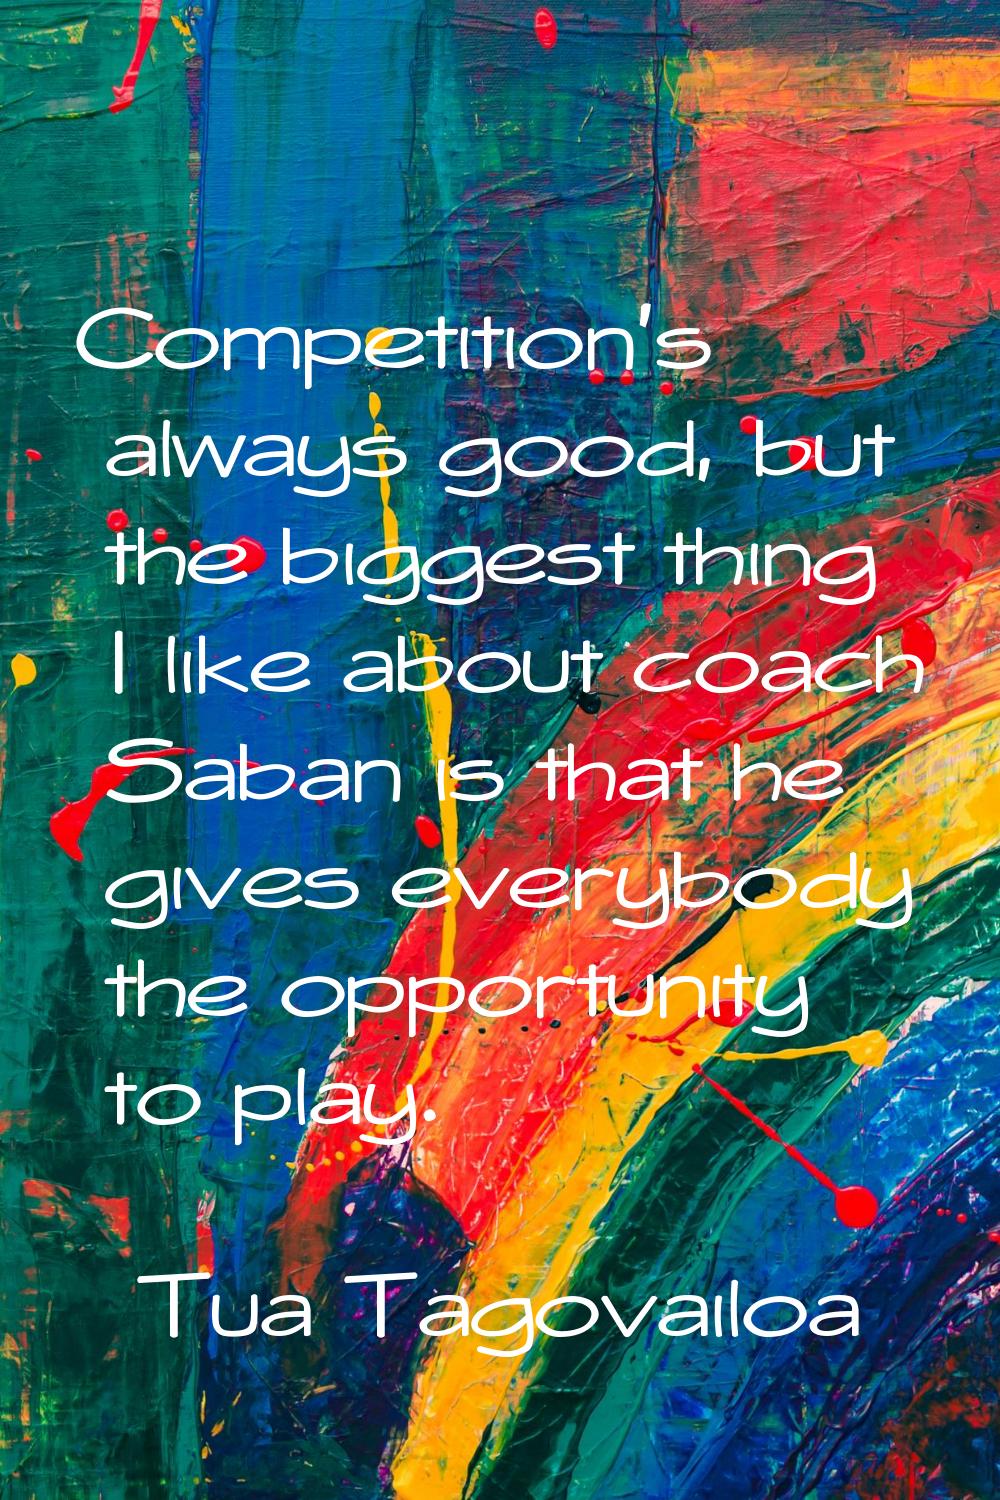 Competition's always good, but the biggest thing I like about coach Saban is that he gives everybod